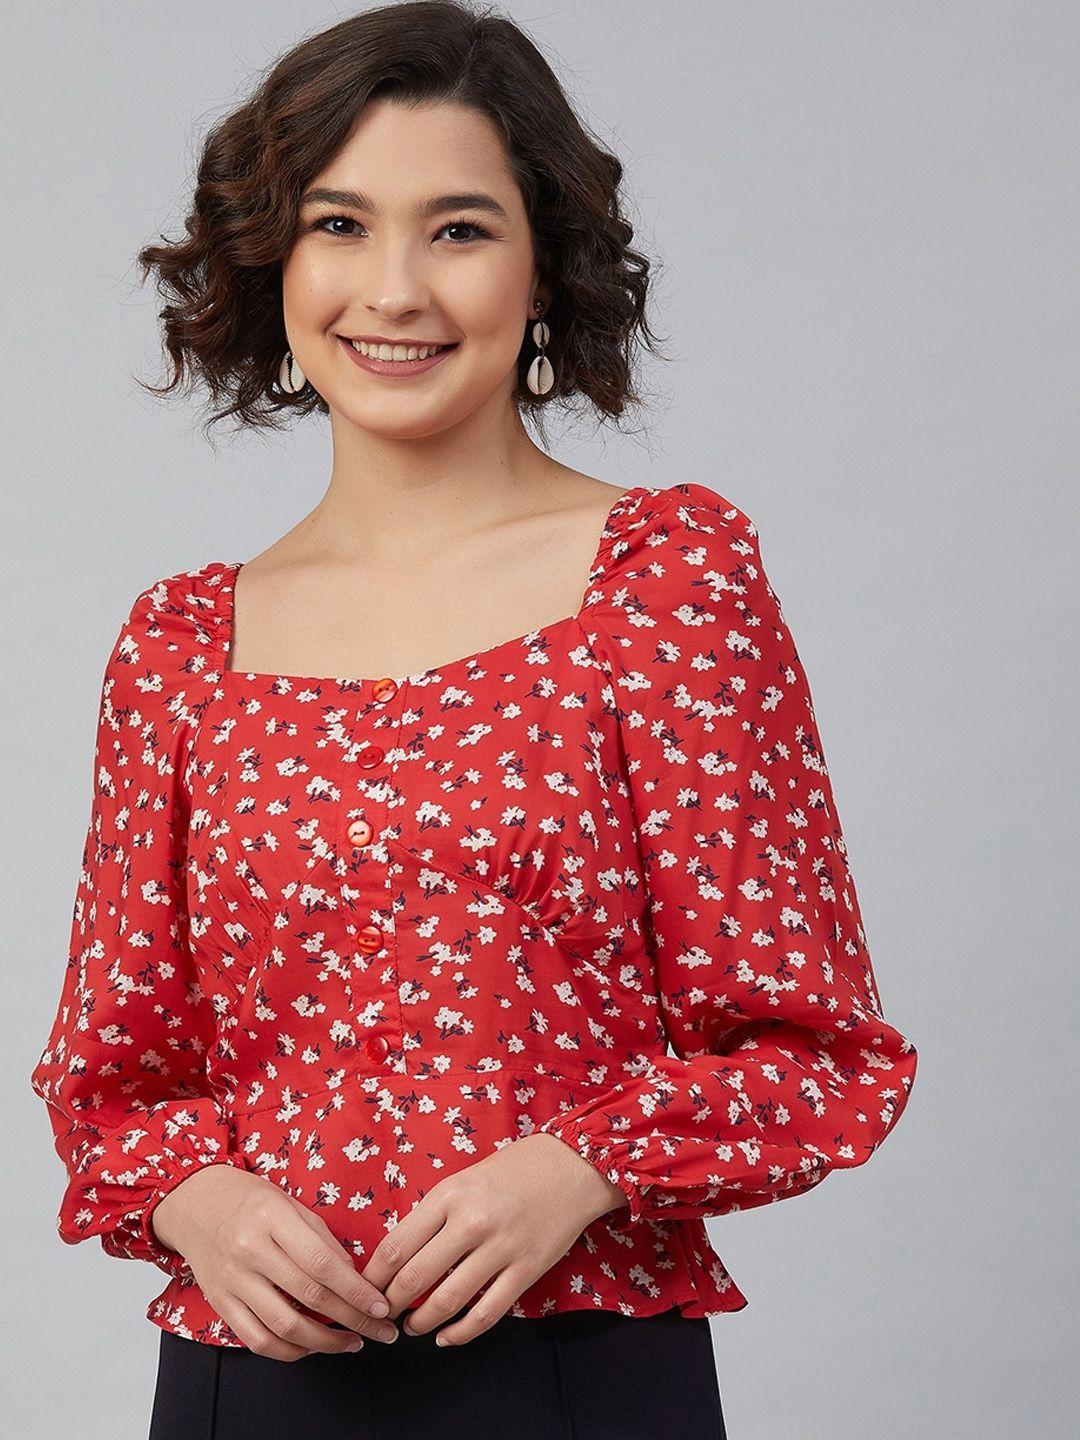 marie-claire-women-red-floral-printed-puff-sleeves-cinched-waist-top